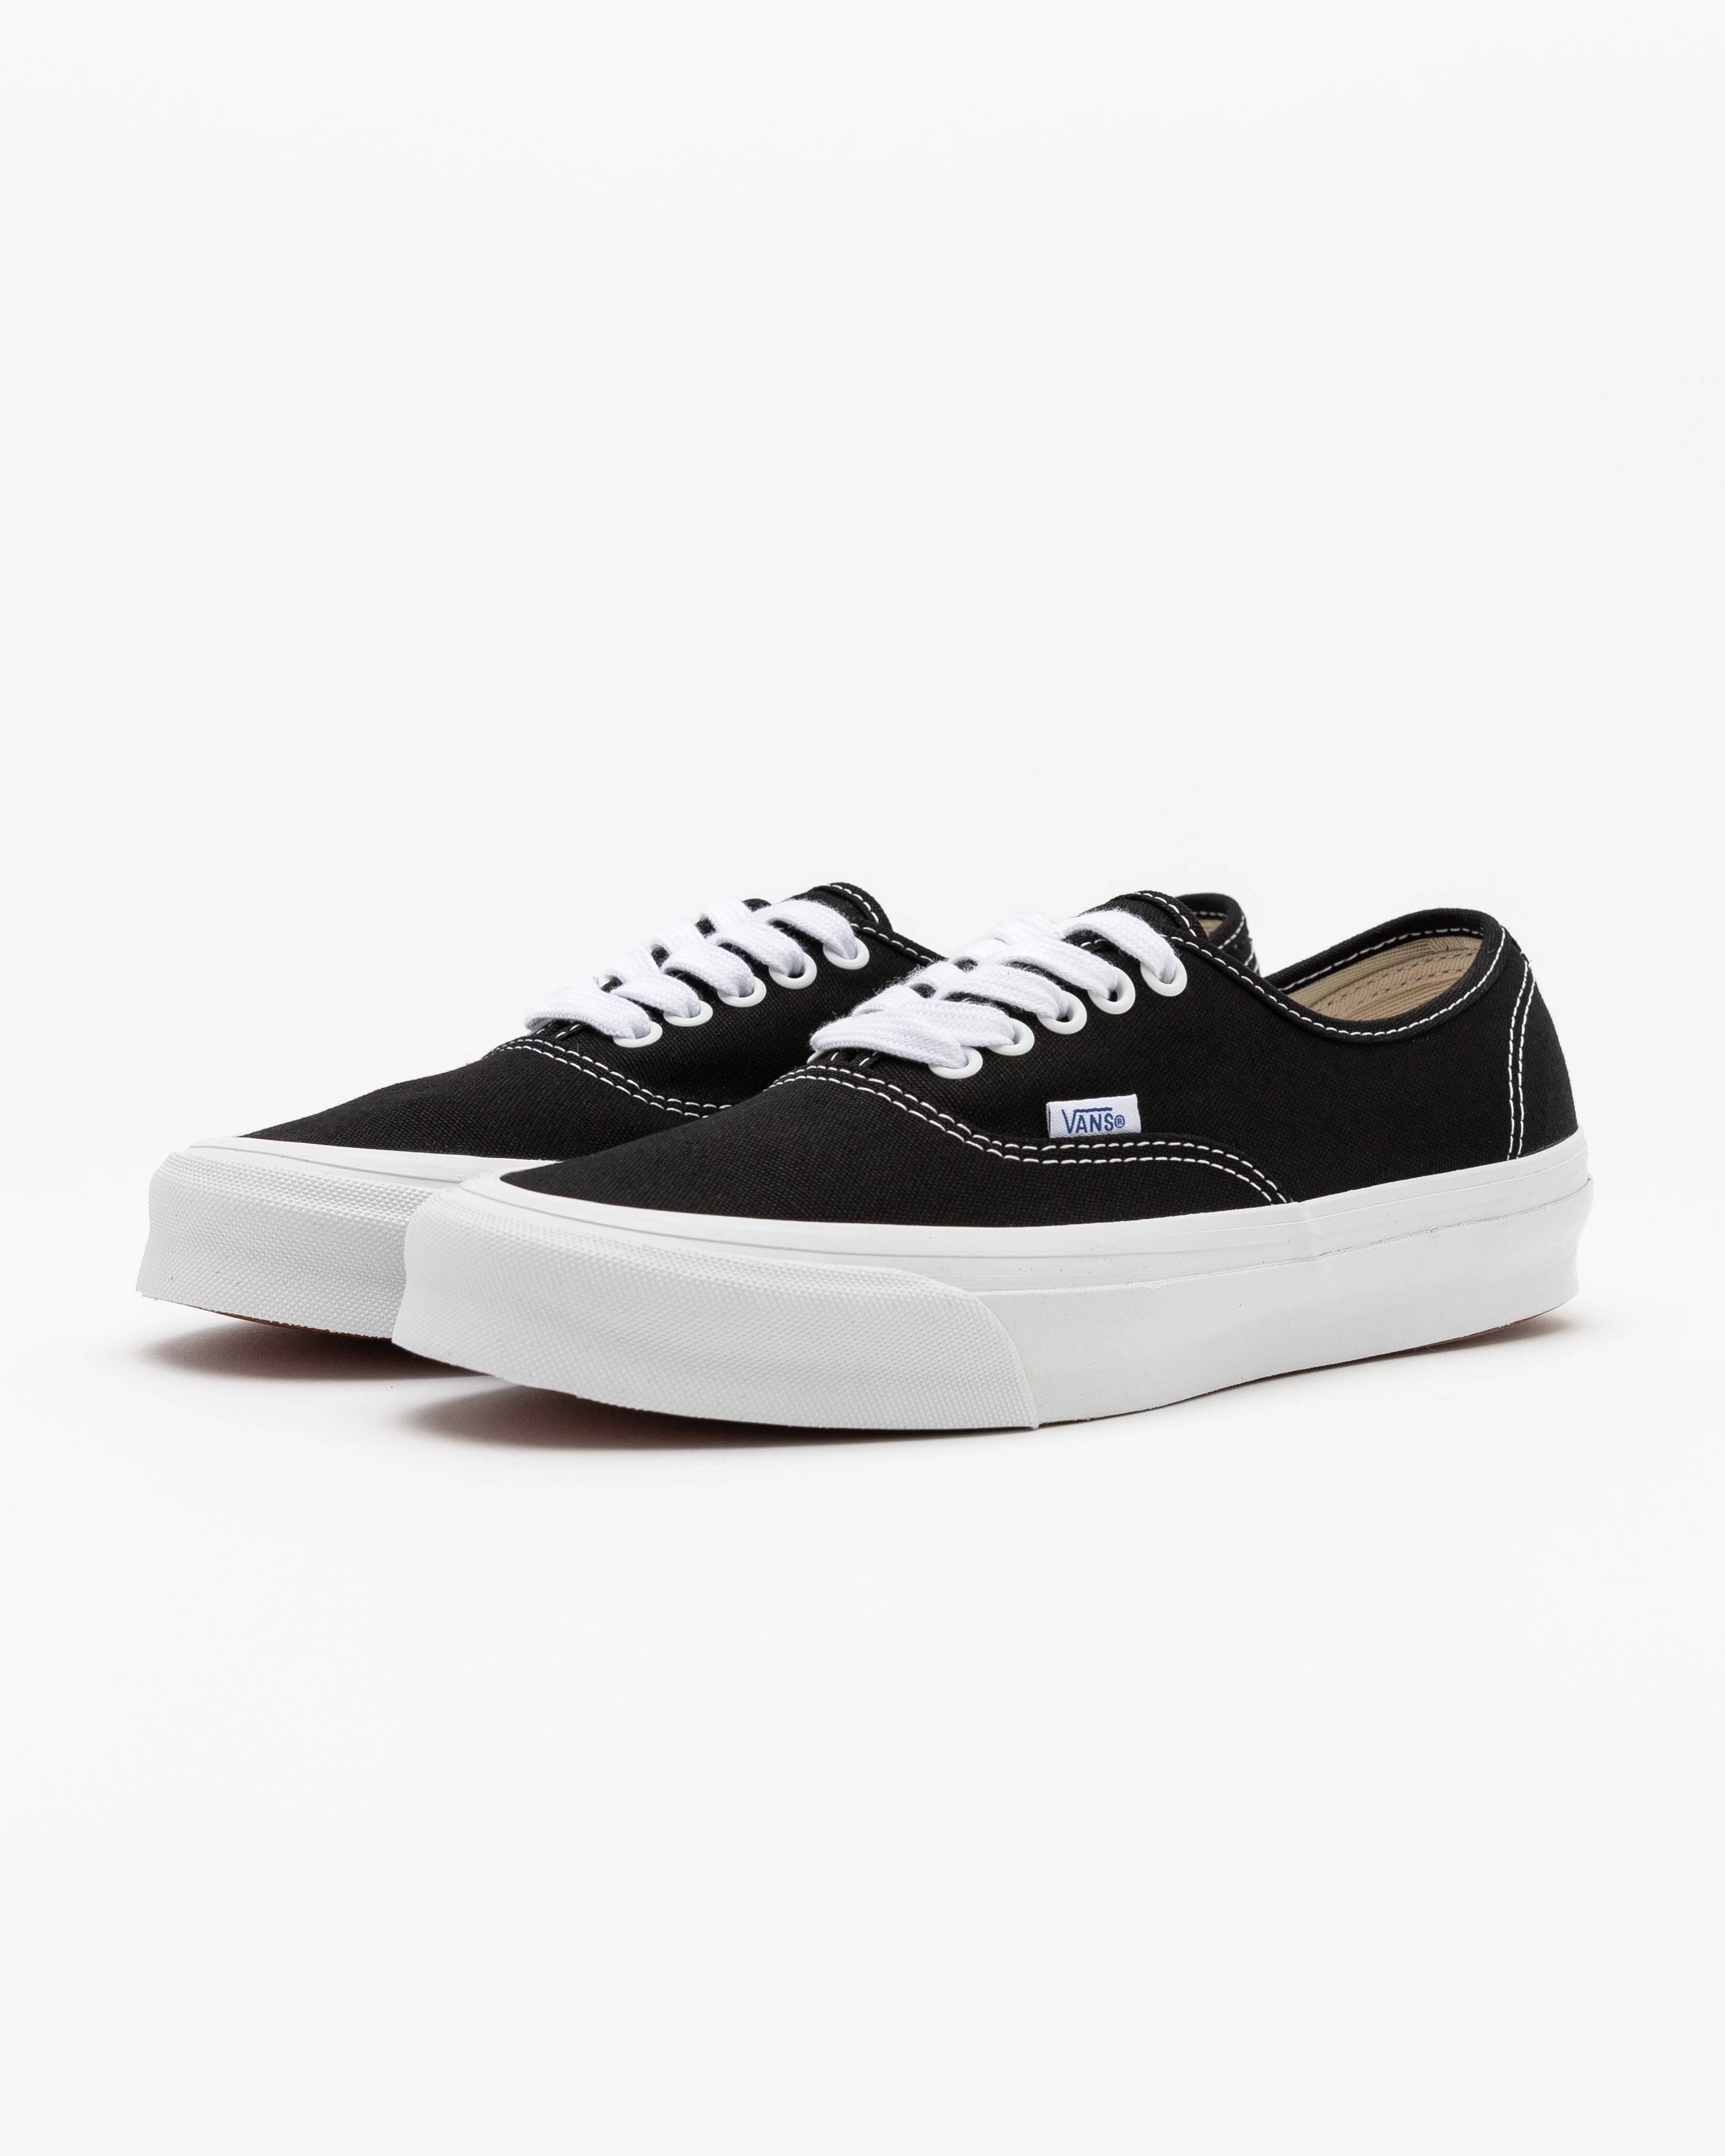 OG Authentic LX Sneakers in Black/White